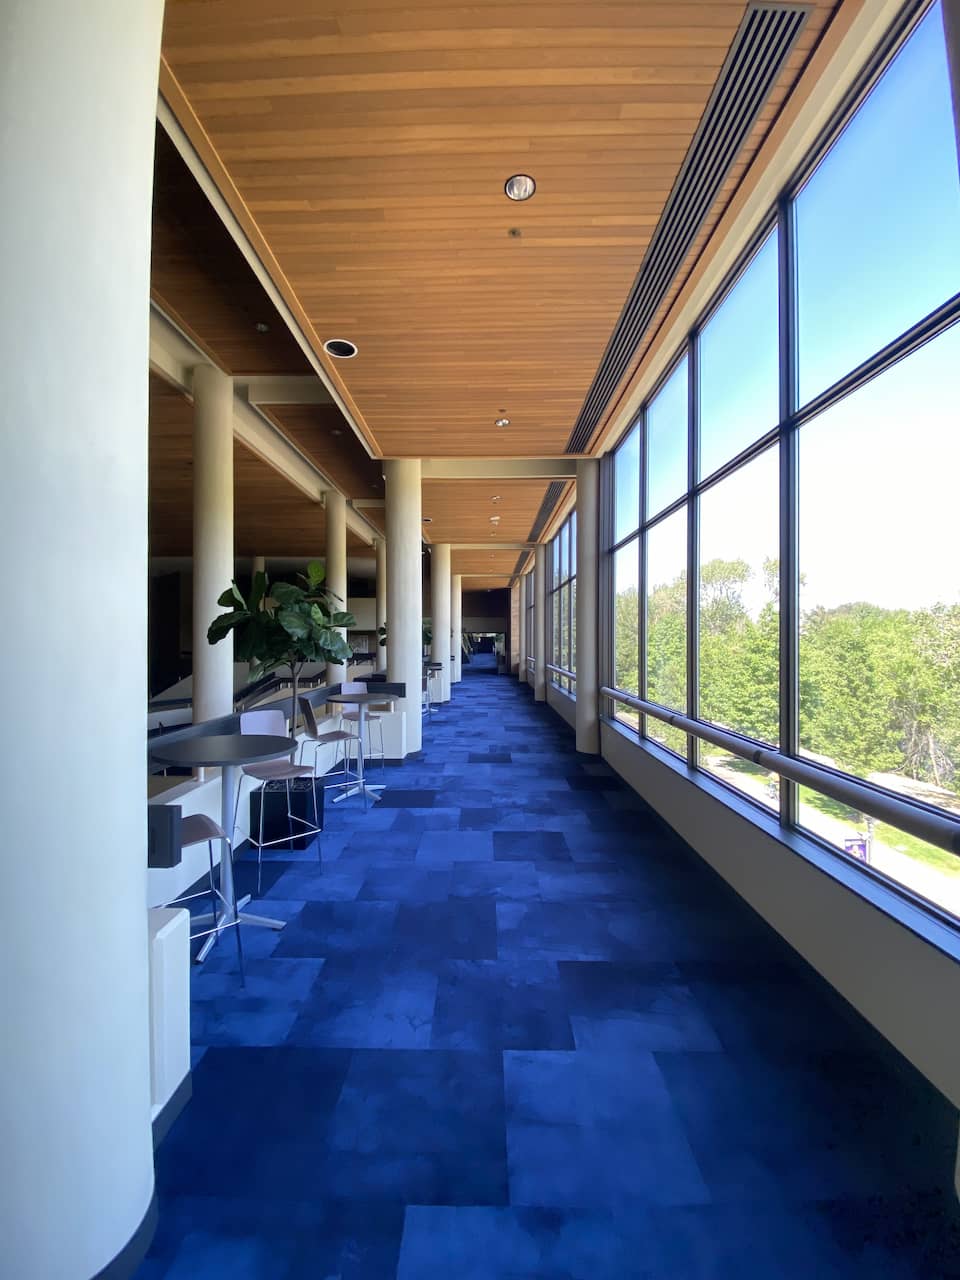 A hallway in the Morrison Center